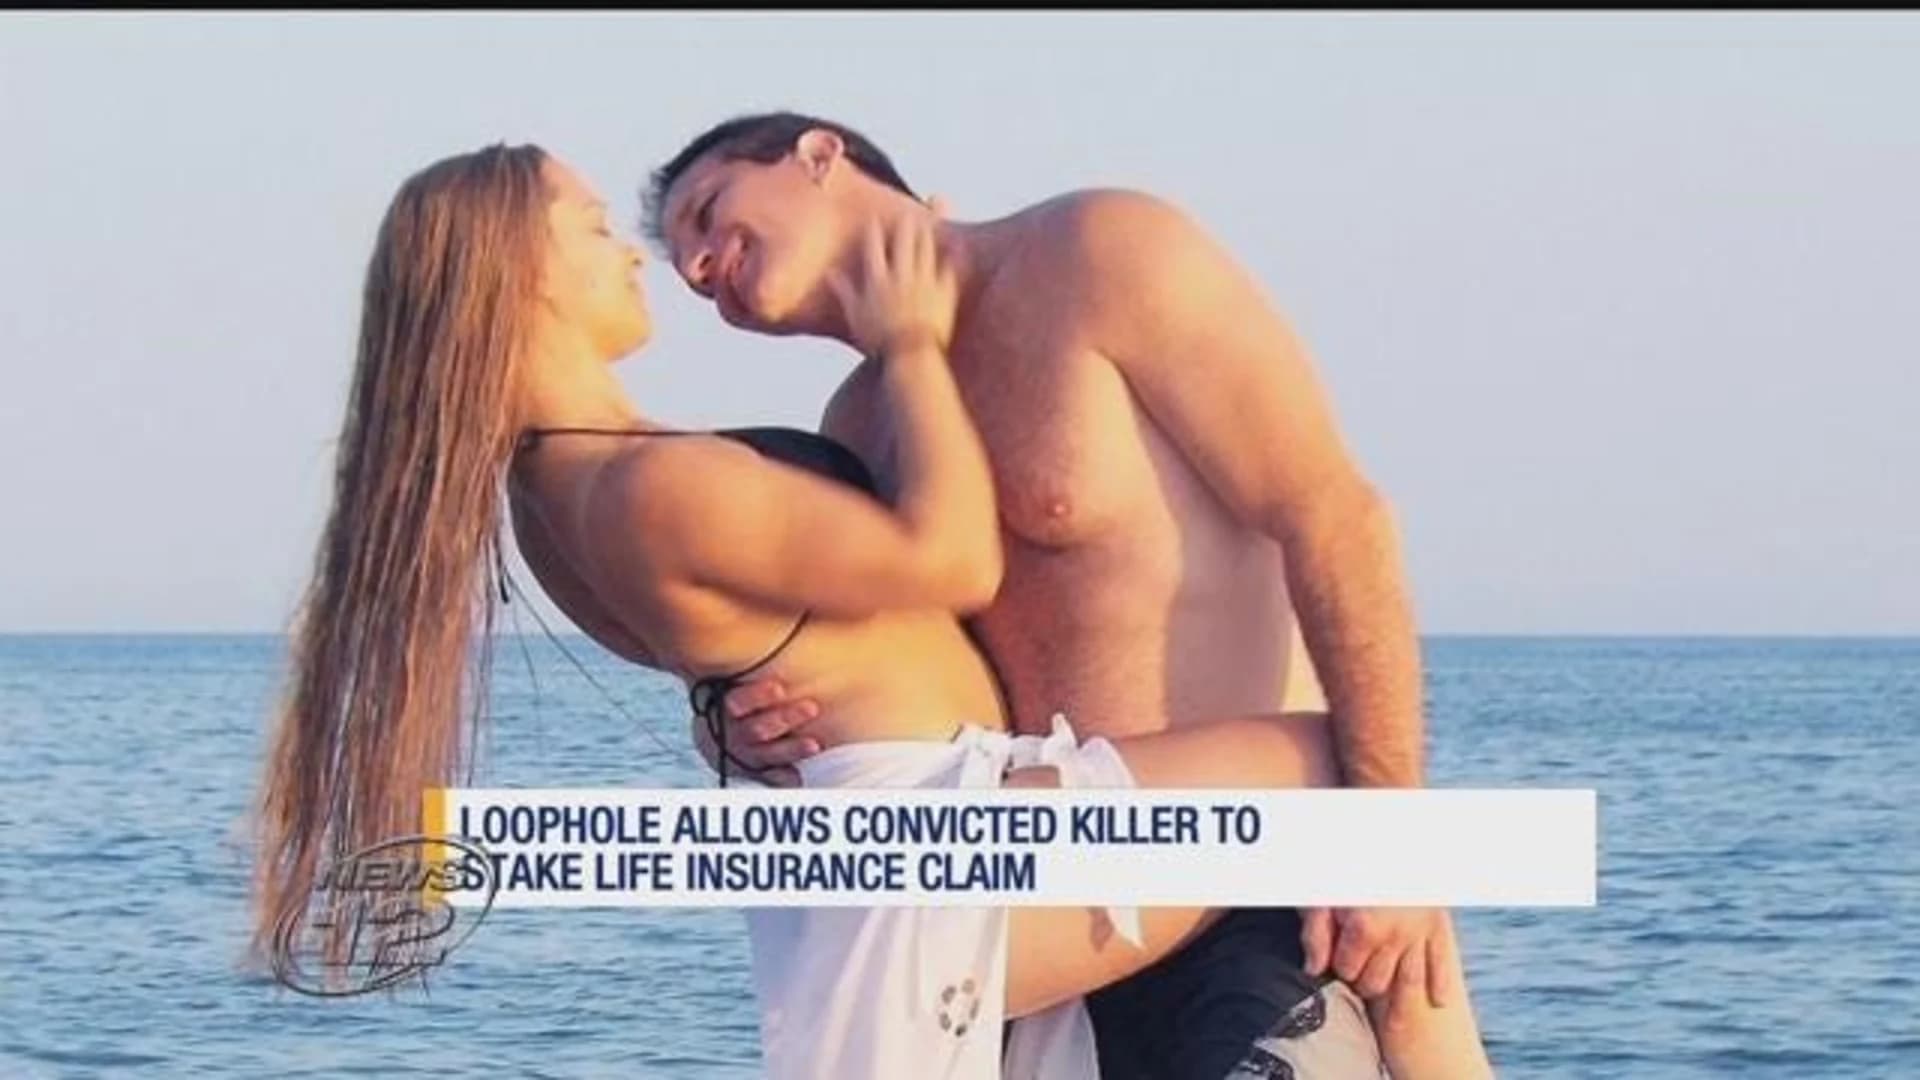 Loophole may let so-called ‘Kayak Killer’ cash out on fiance’s insurance policy